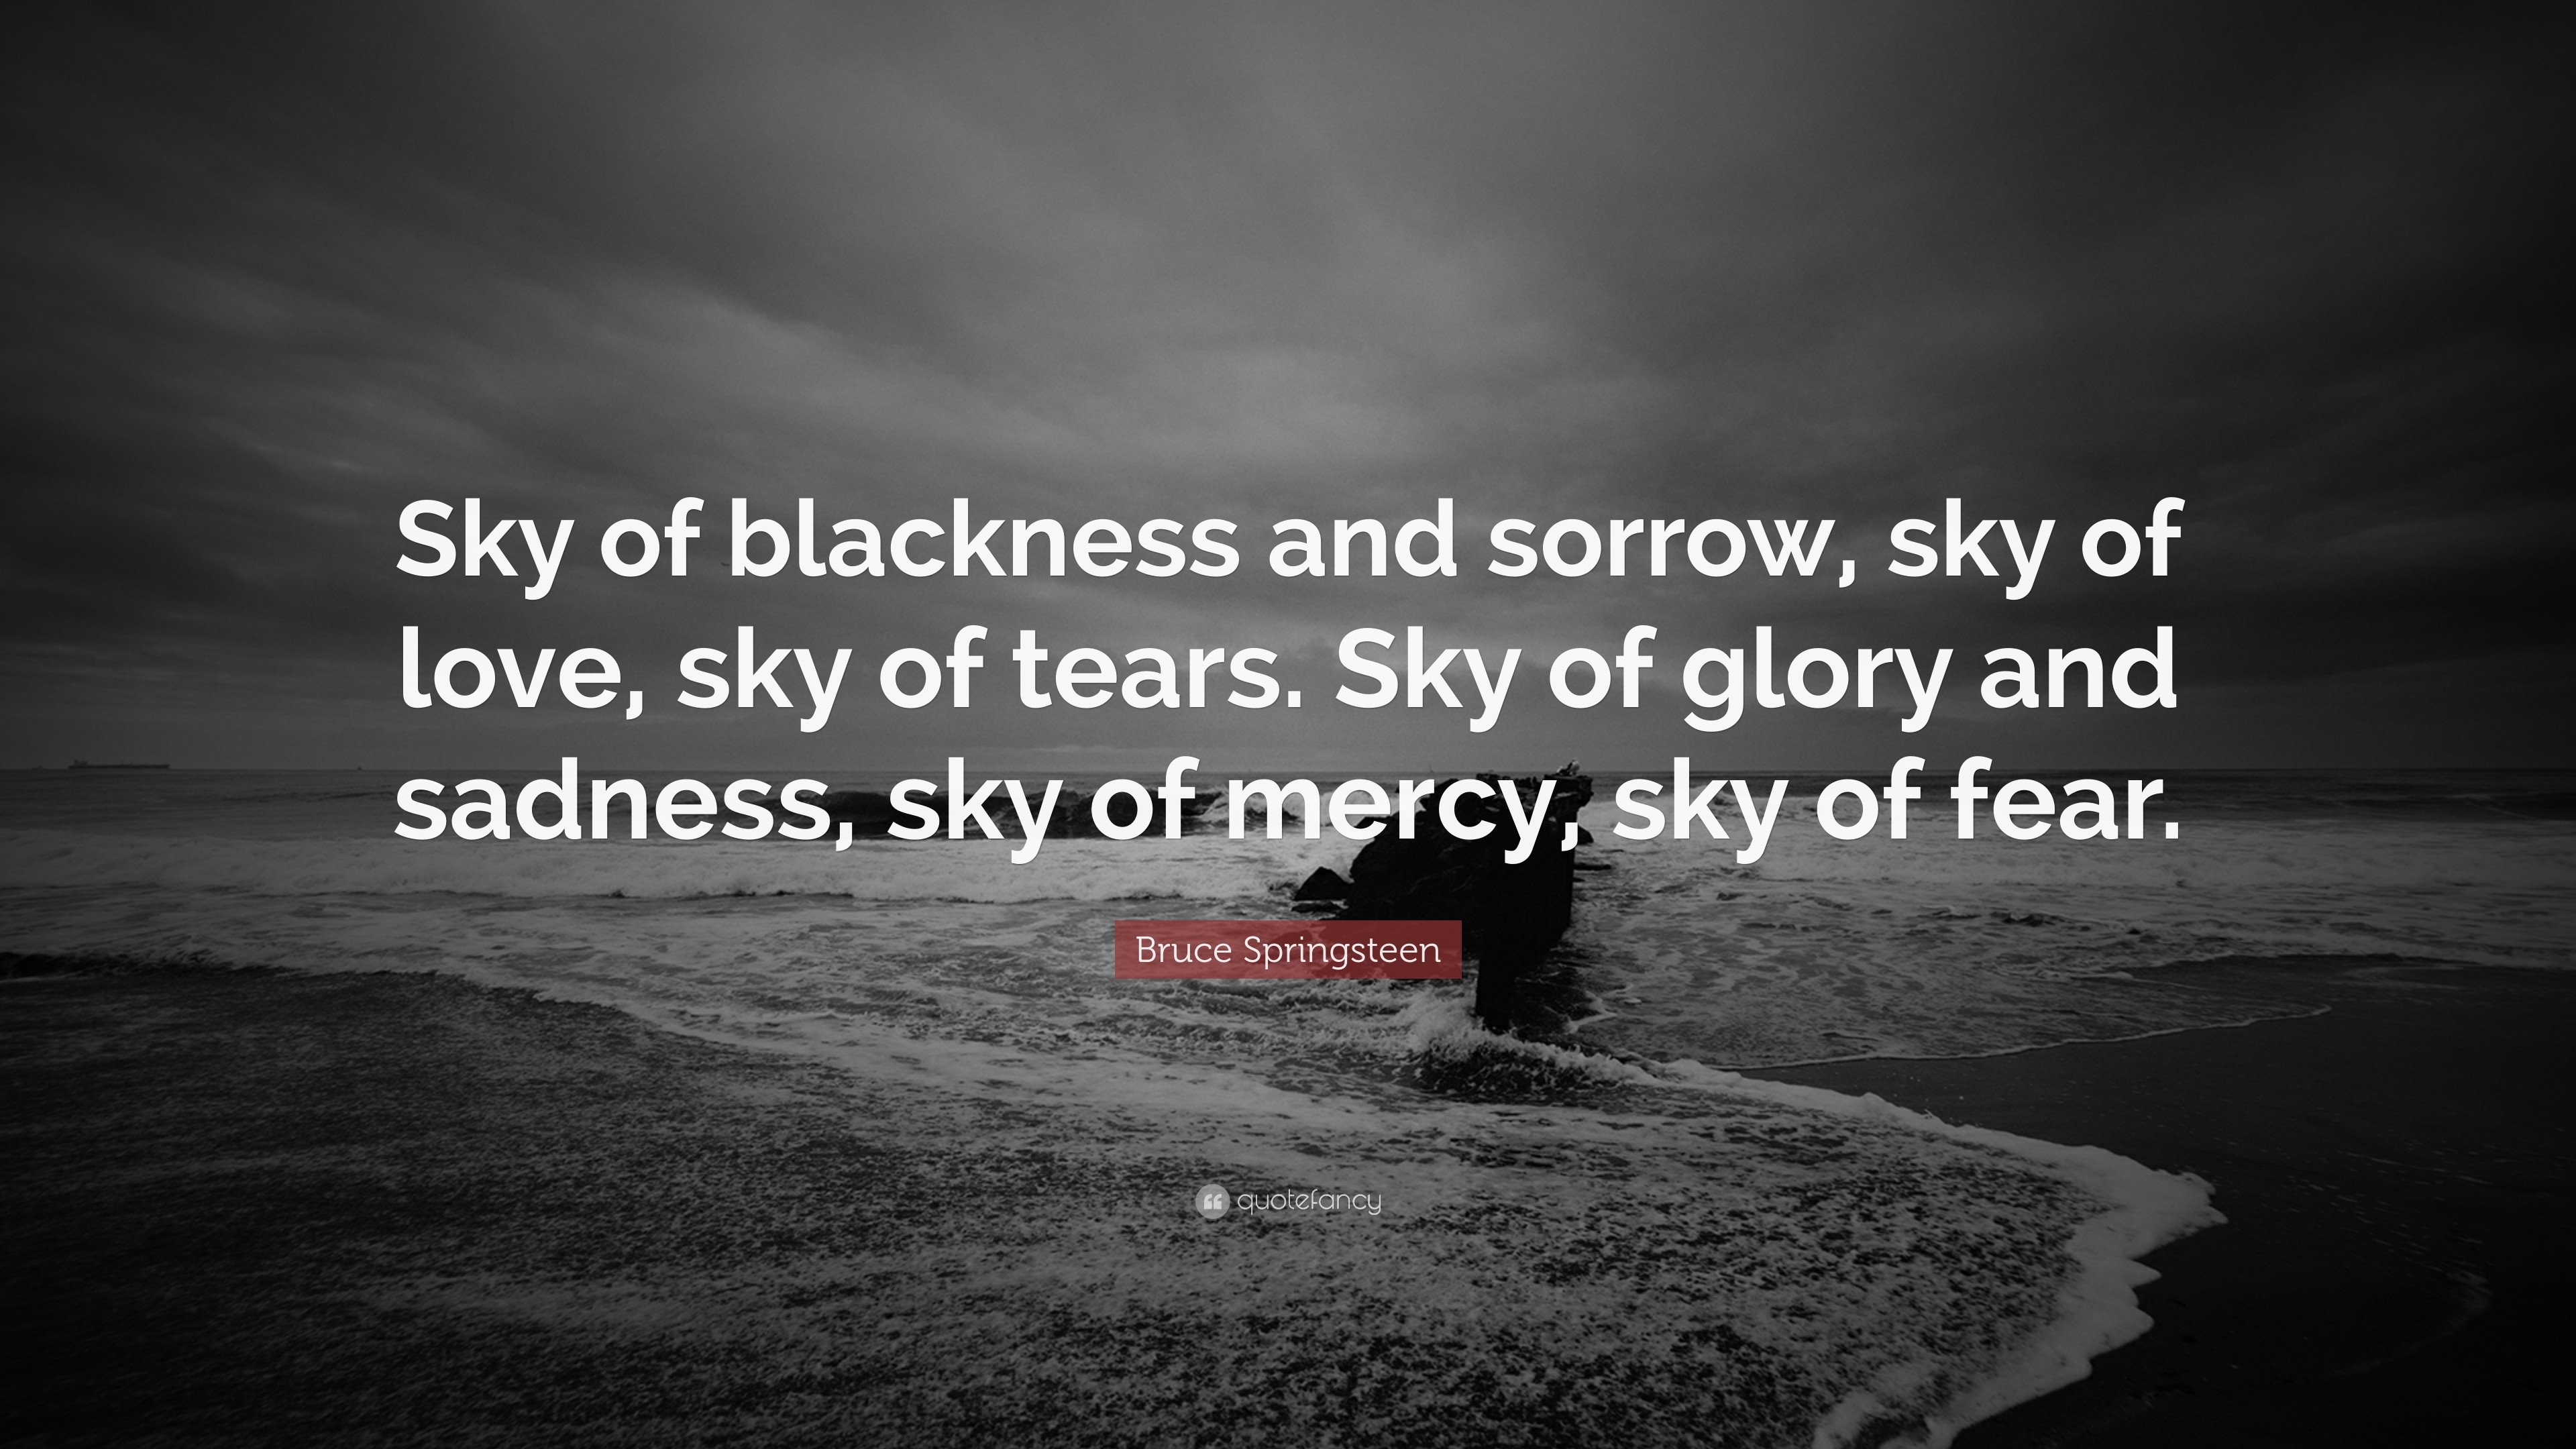 3840x2160 Bruce Springsteen Quote: “Sky of blackness and sorrow, sky of love, sky